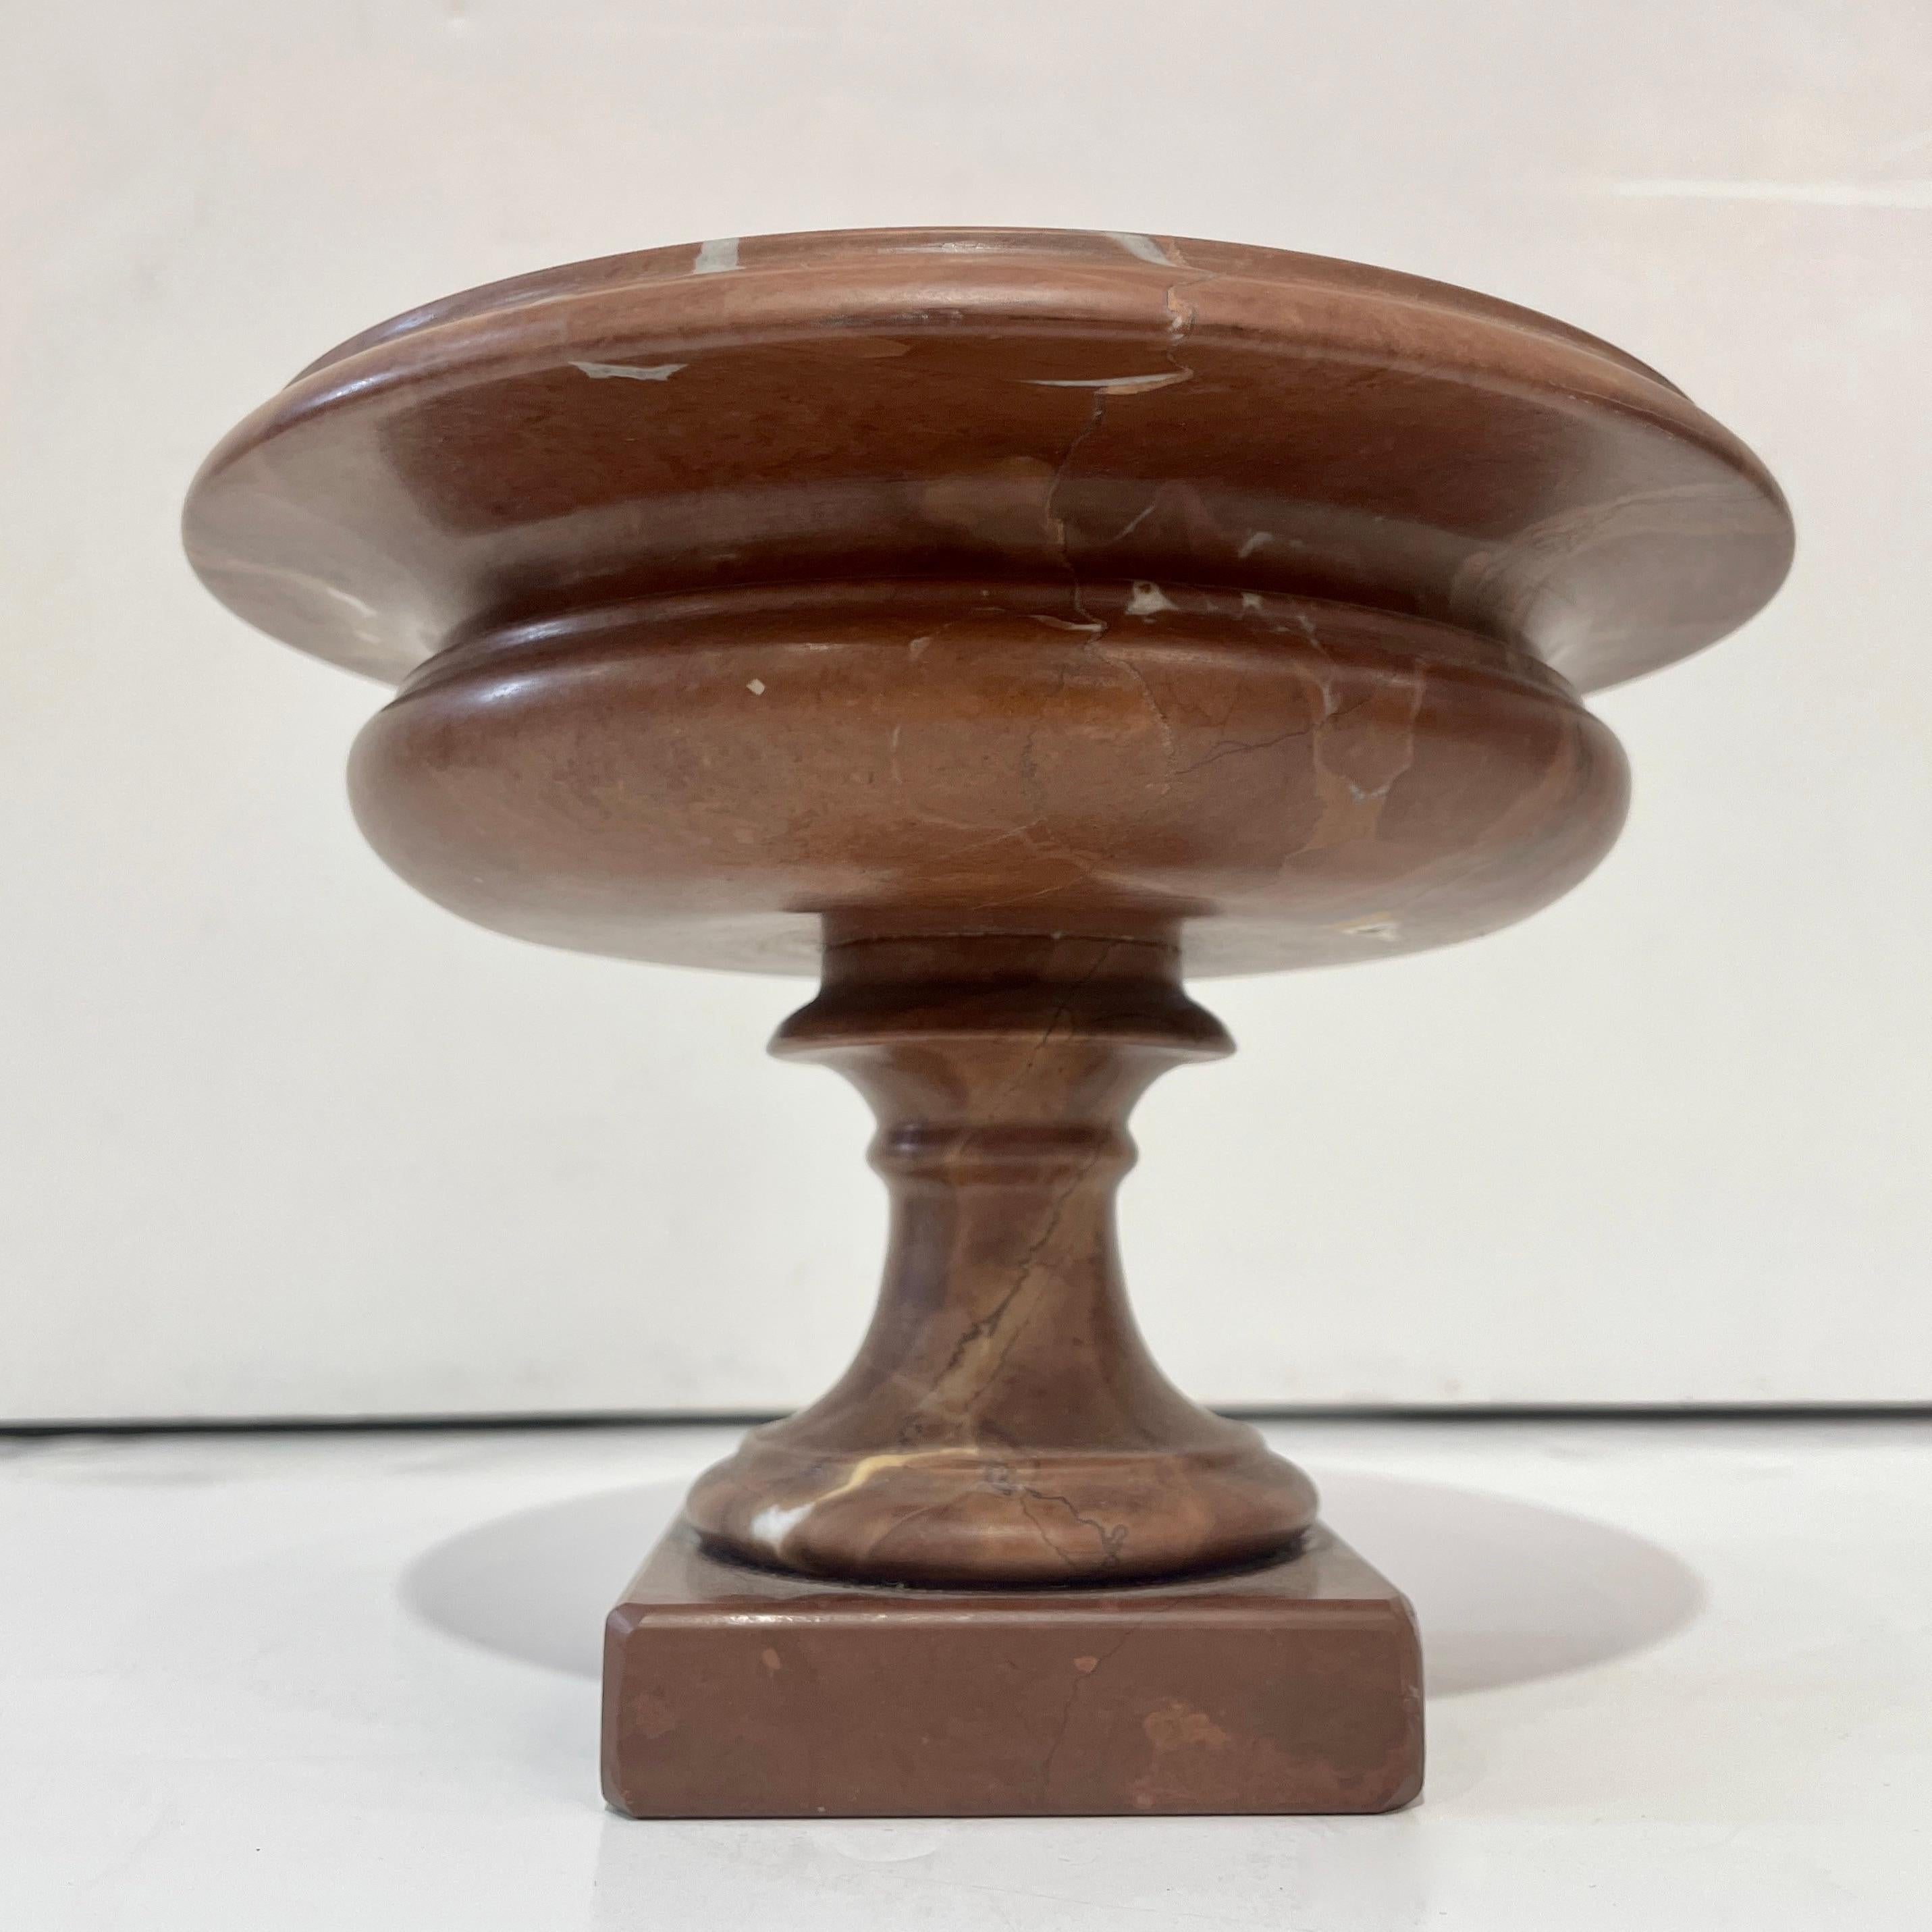 Mid-20th Century 1930s Neoclassical Italian Carved Brown Red Marble Tazza Bowl with White Veins